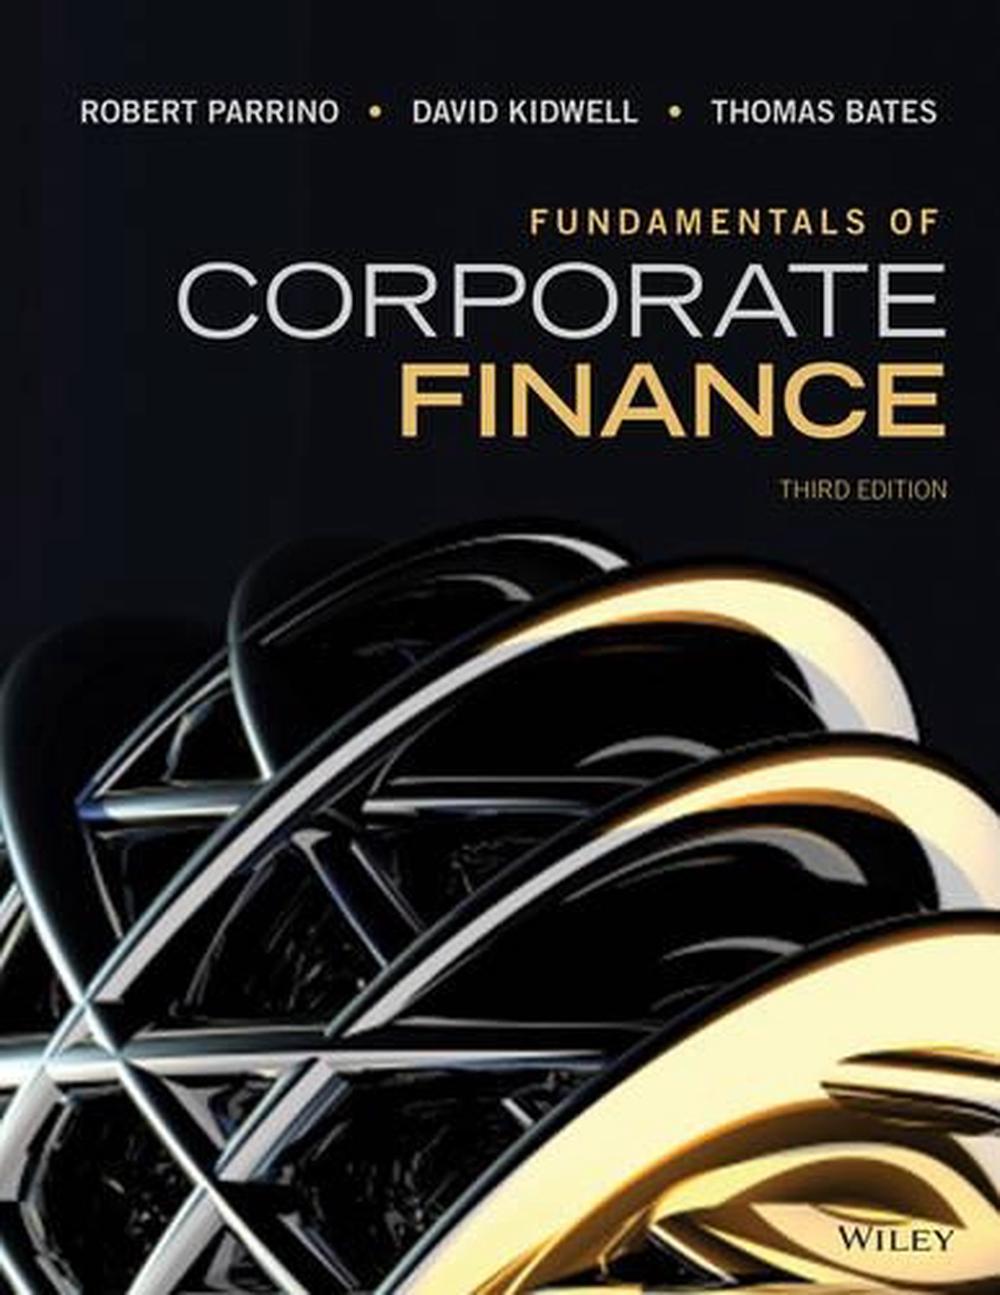 Fundamentals of Corporate Finance, Third Edition by Robert Parrino